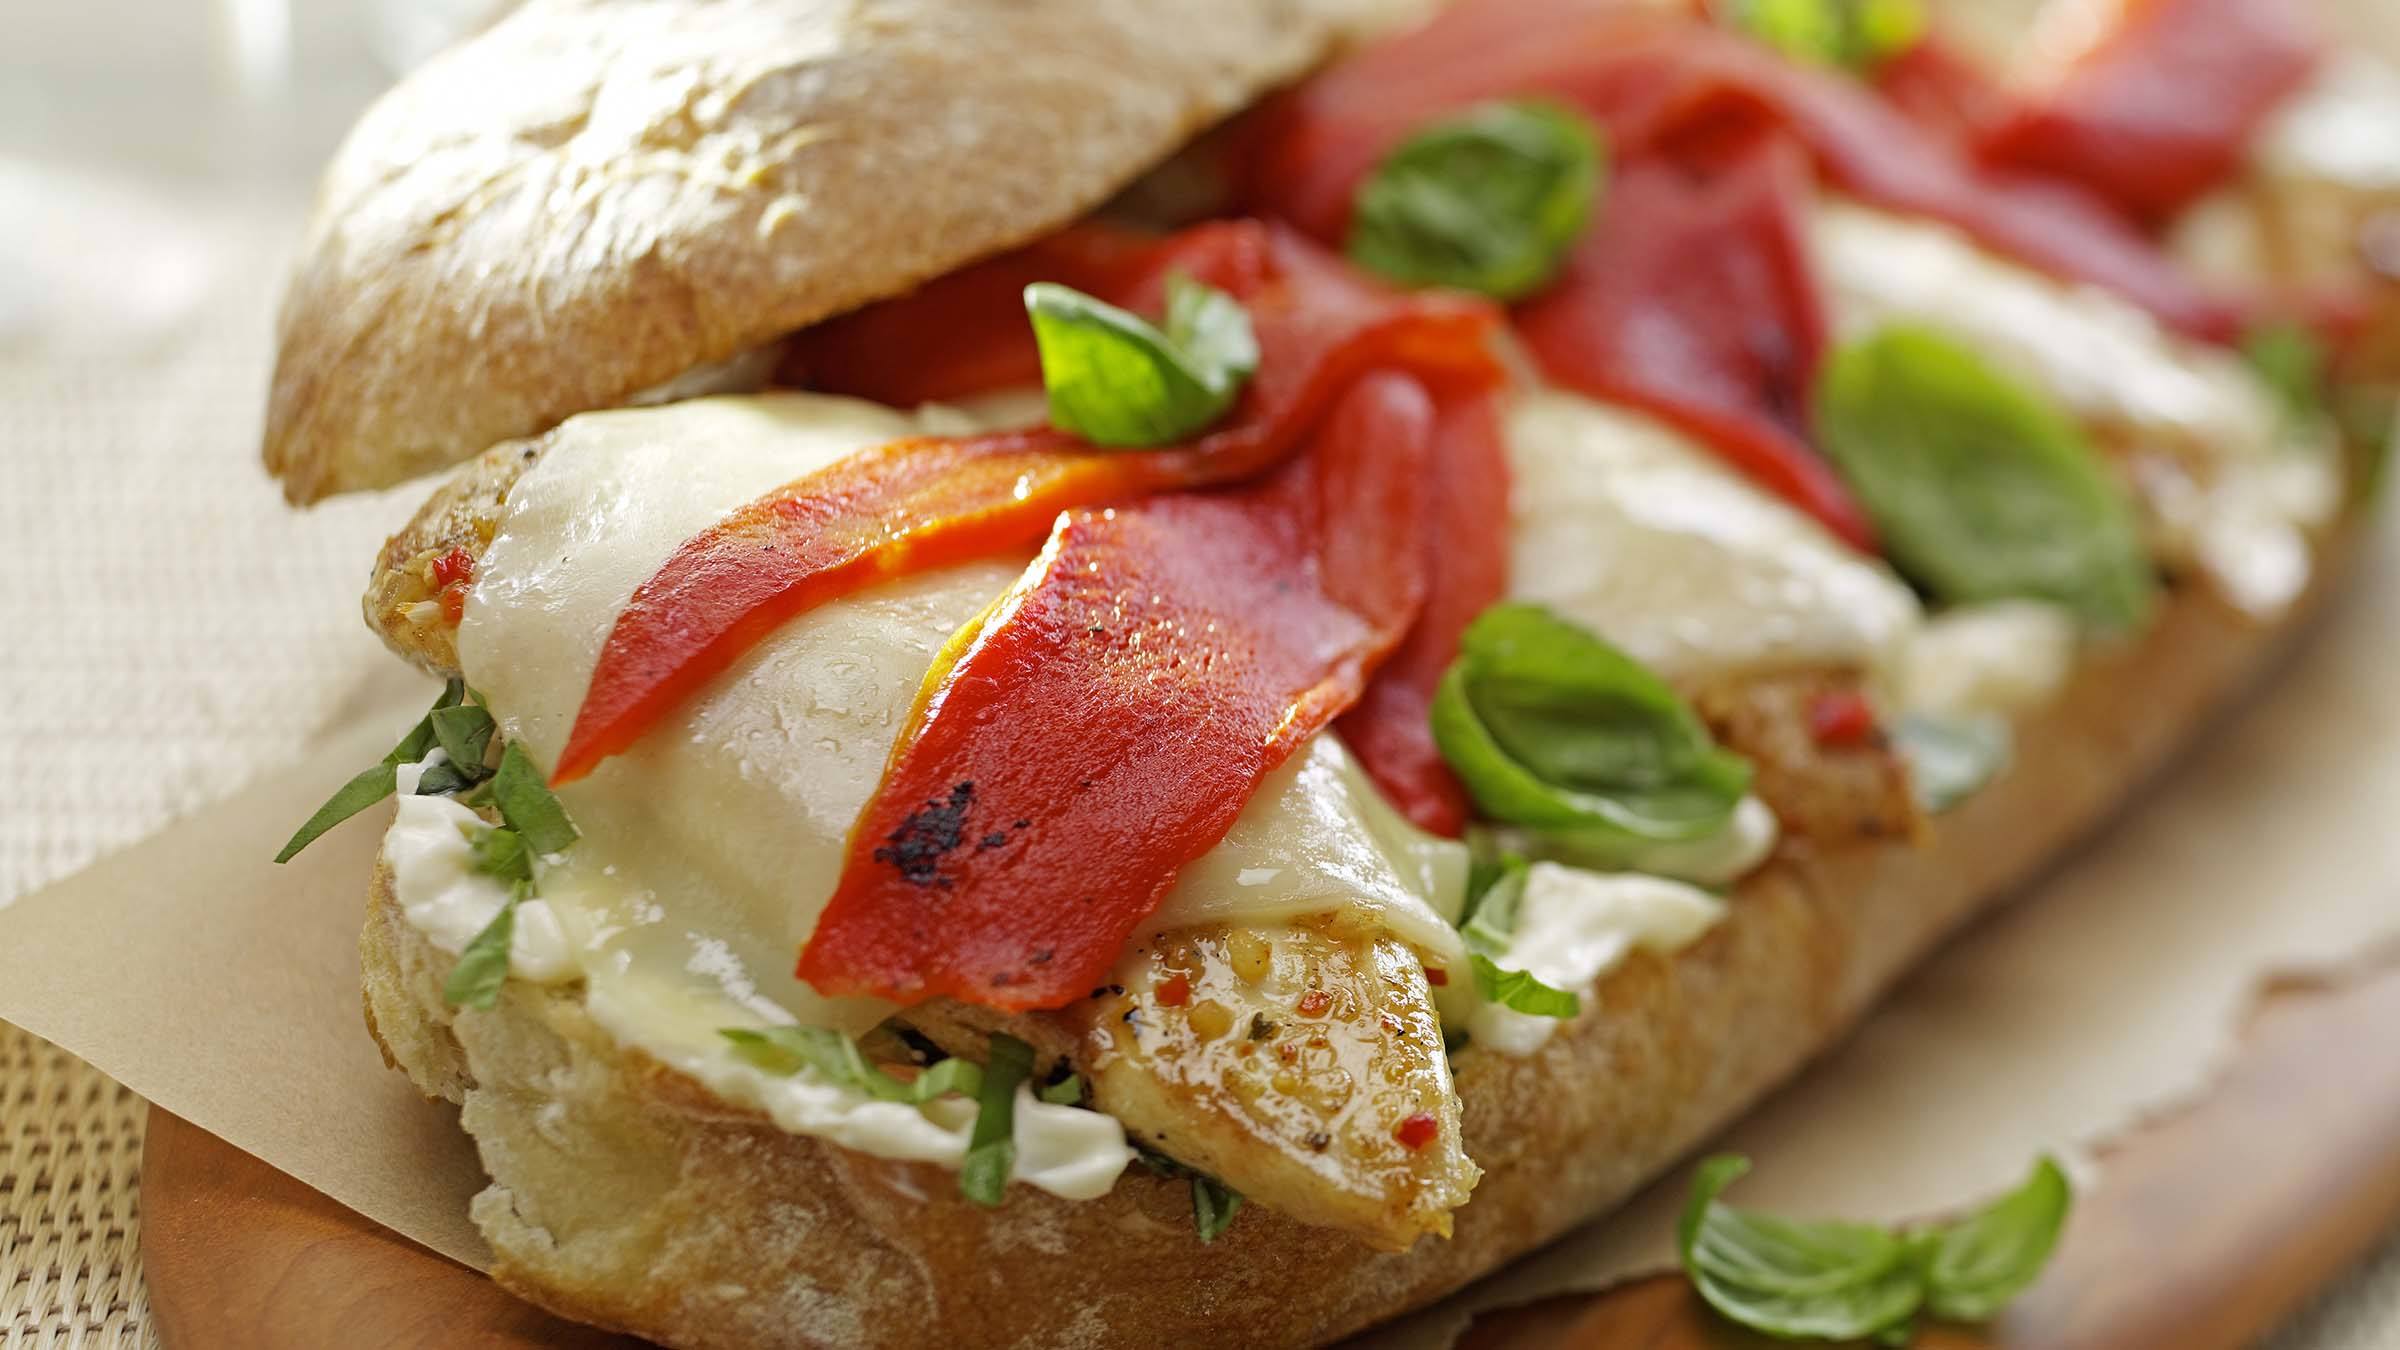 Grilled Chicken & Roasted Peppers on Ciabatta